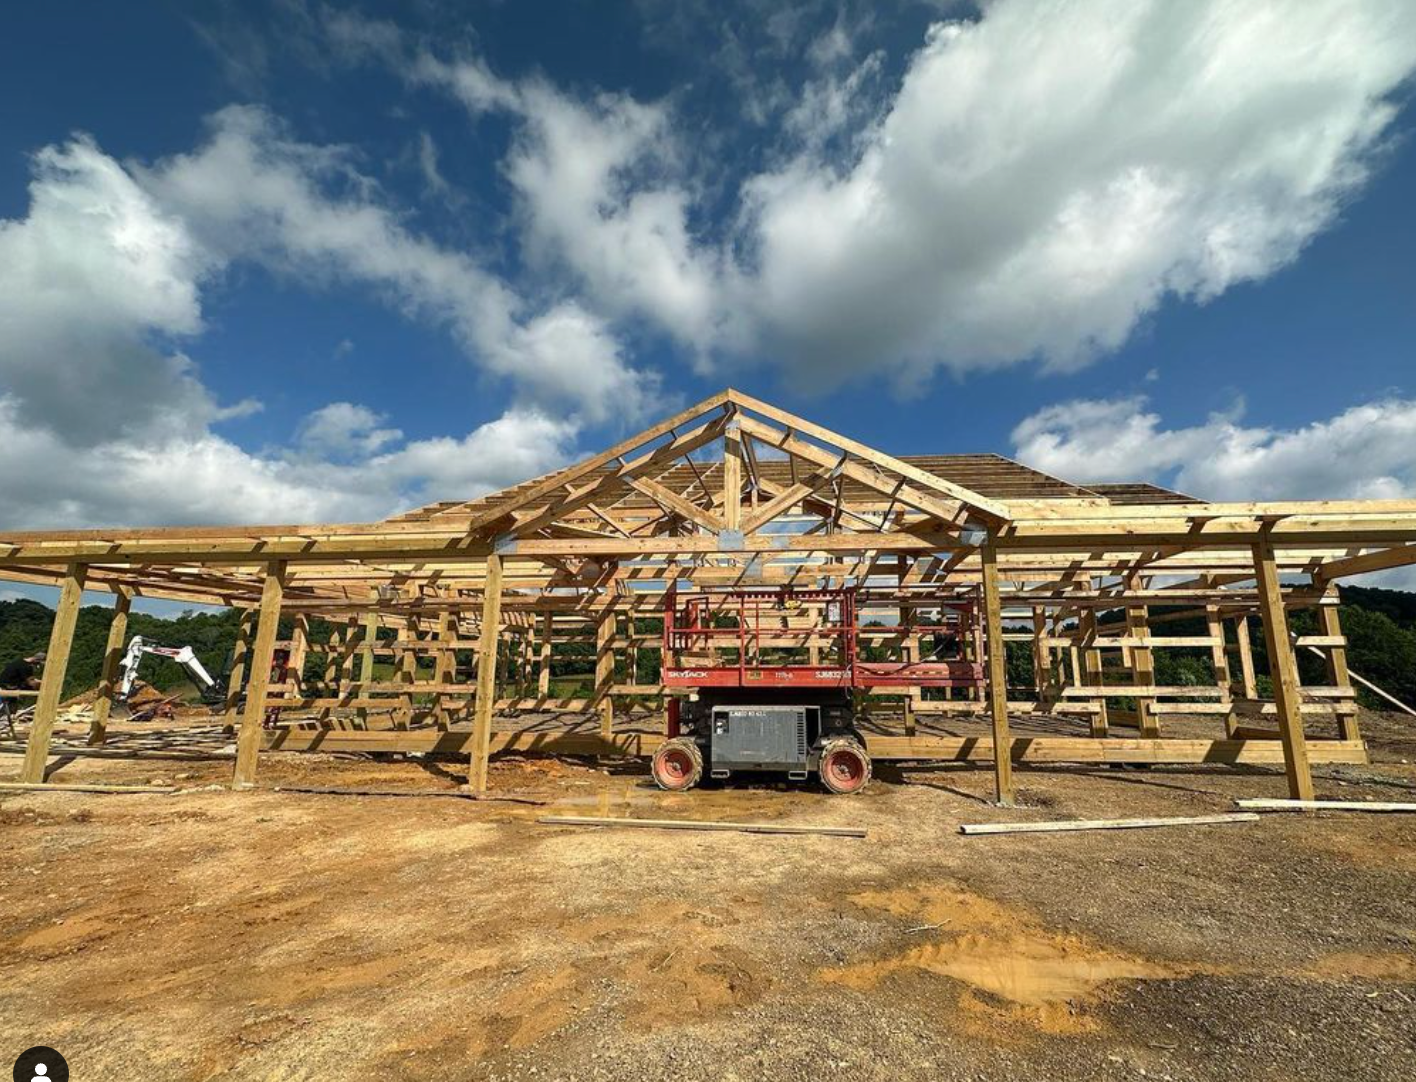 Large open barndominium layout under construction showing wooden framing